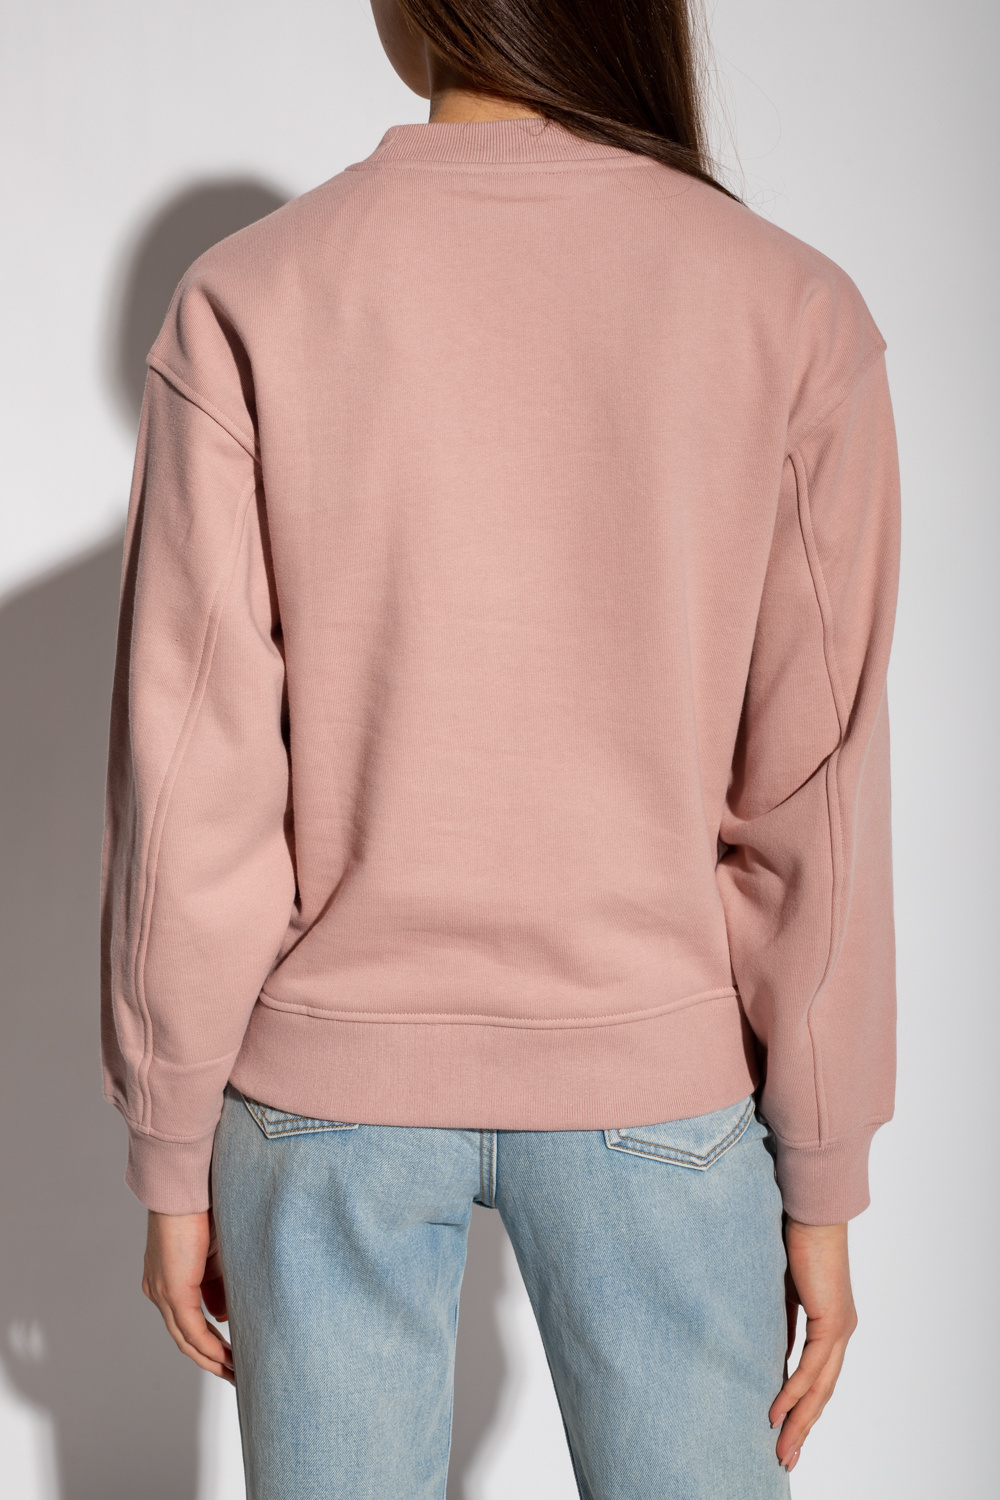 Levi's preston sweatshirt ‘Made & Crafted ®’ collection